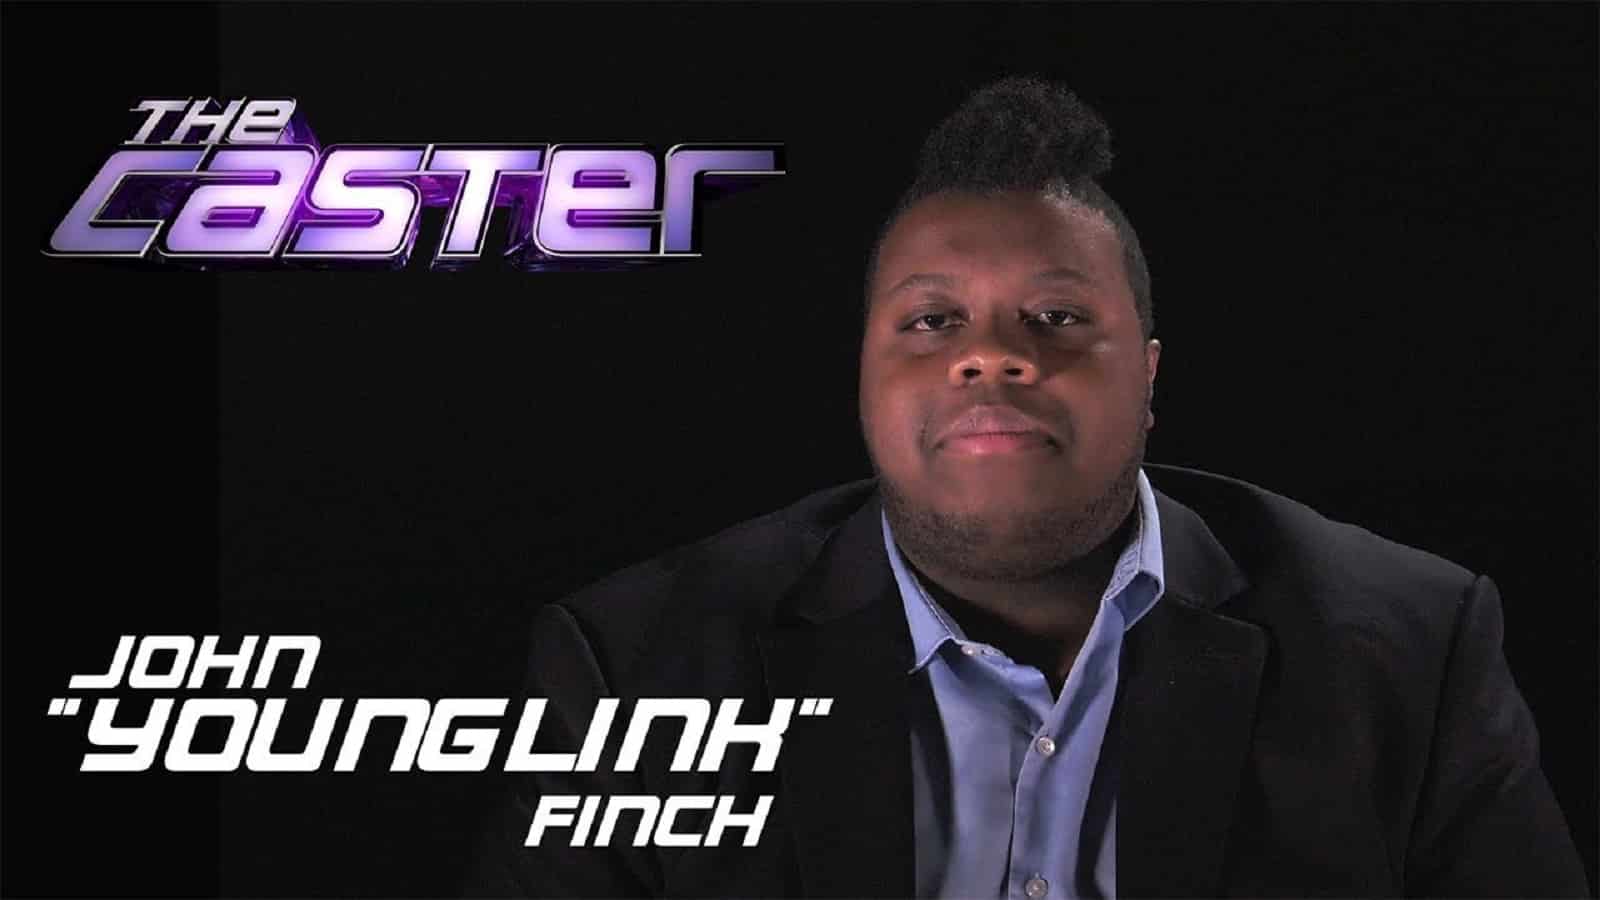 John Finch SMITE The Caster Competition